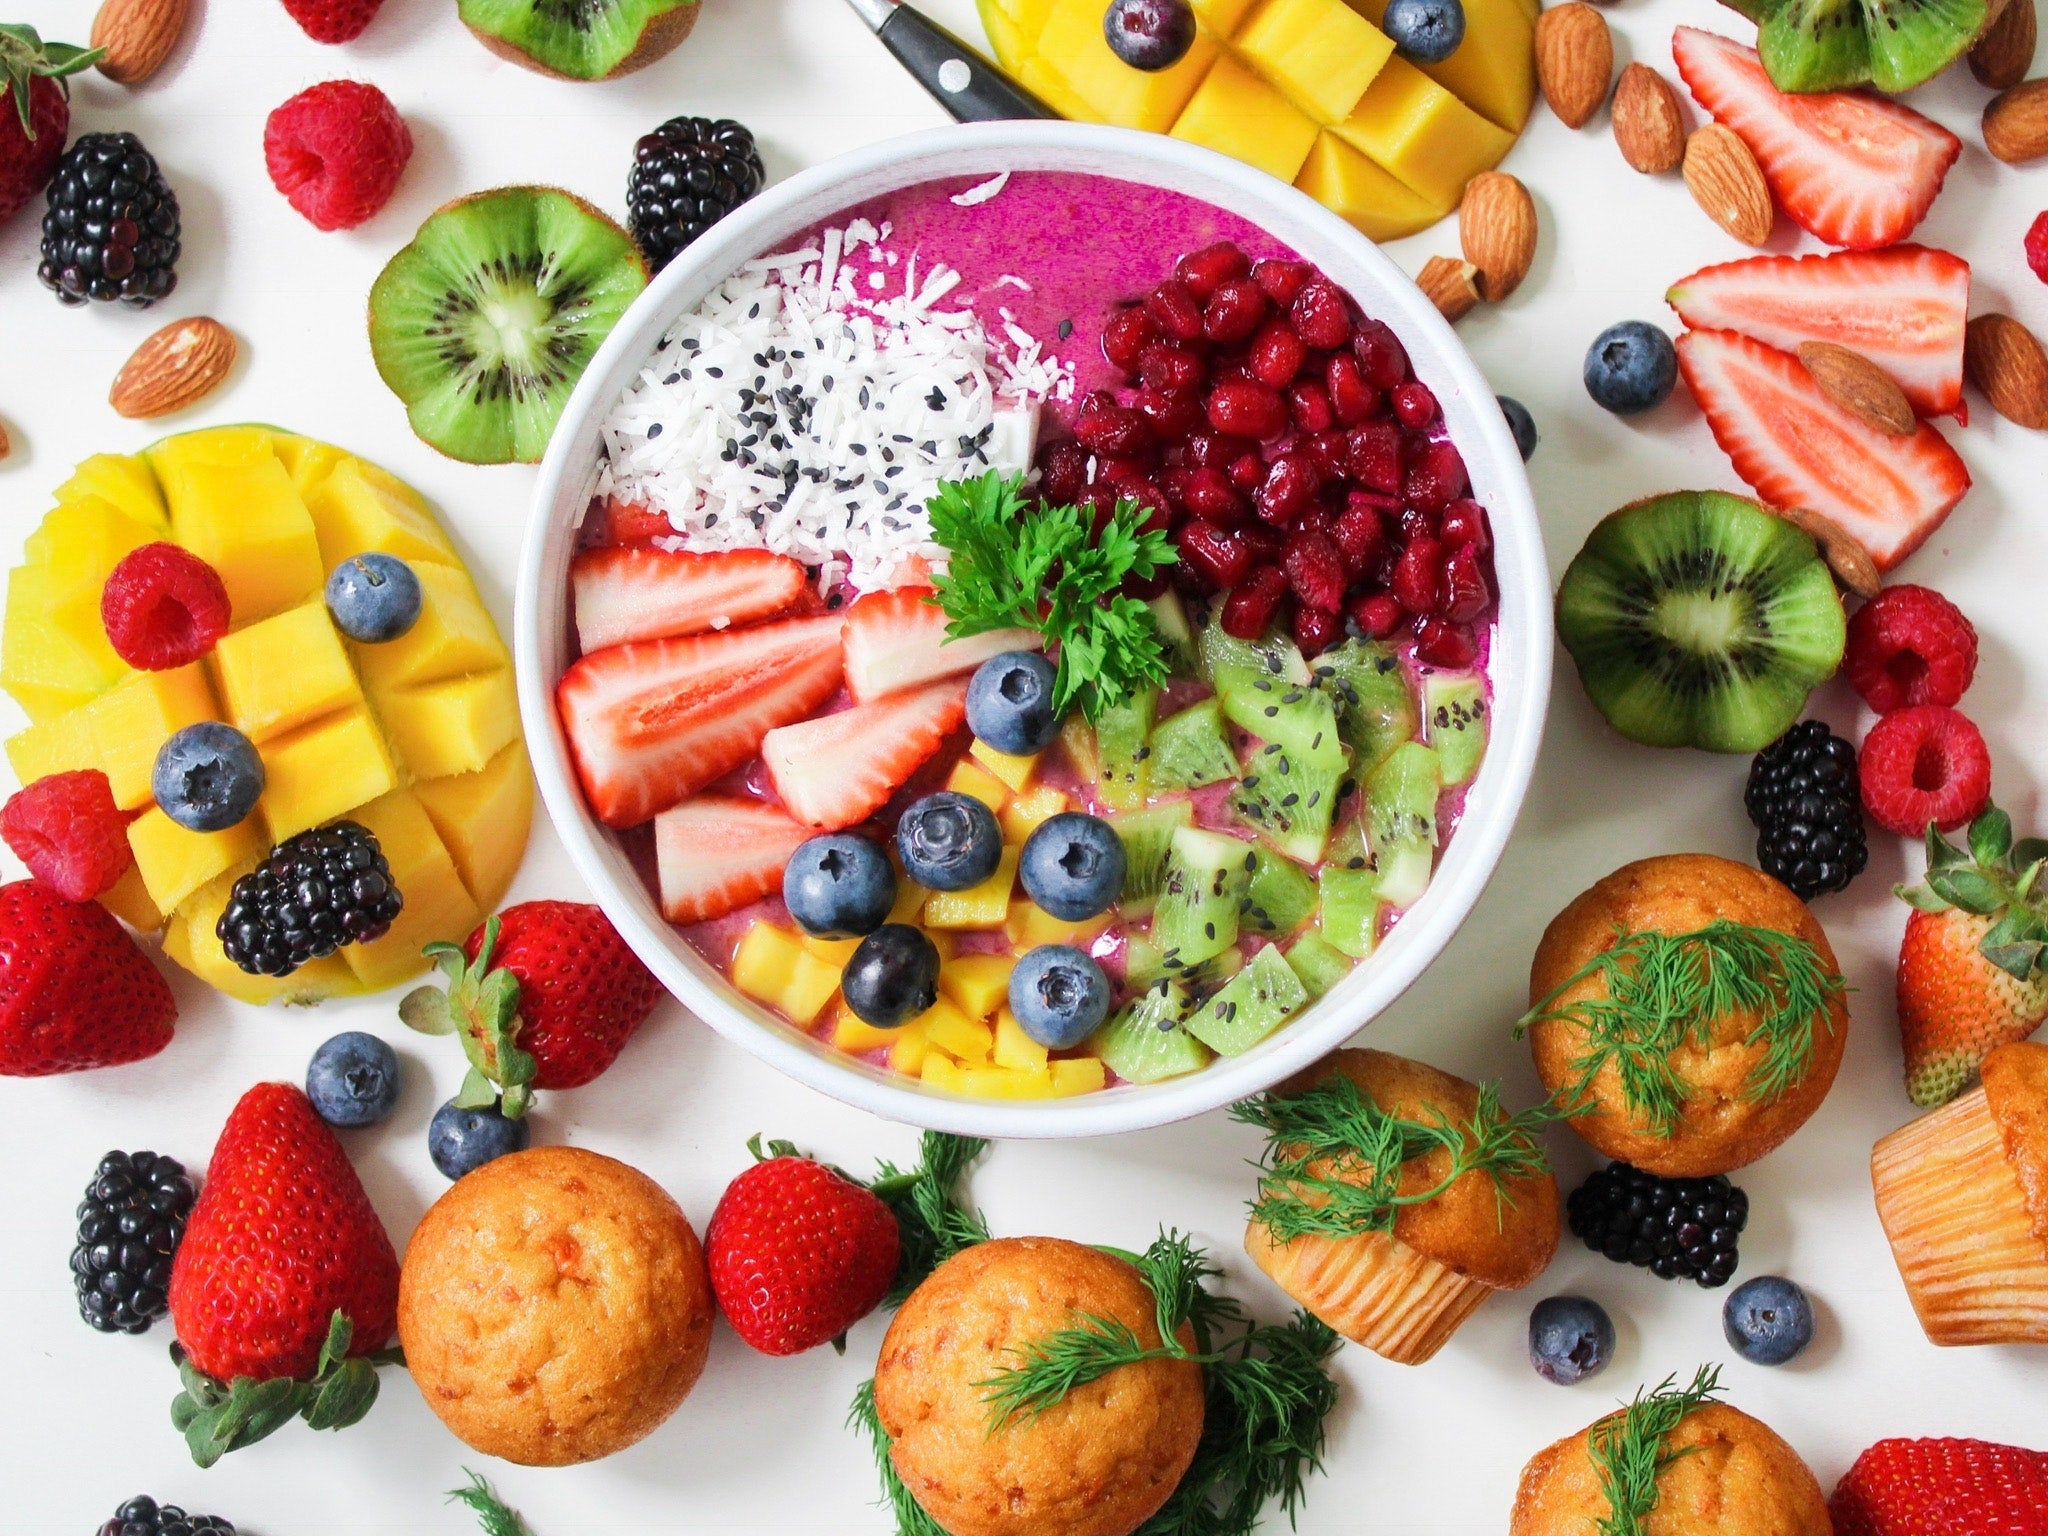 Eat the Rainbow: Foster Good Health Through a Whole Foods Diet